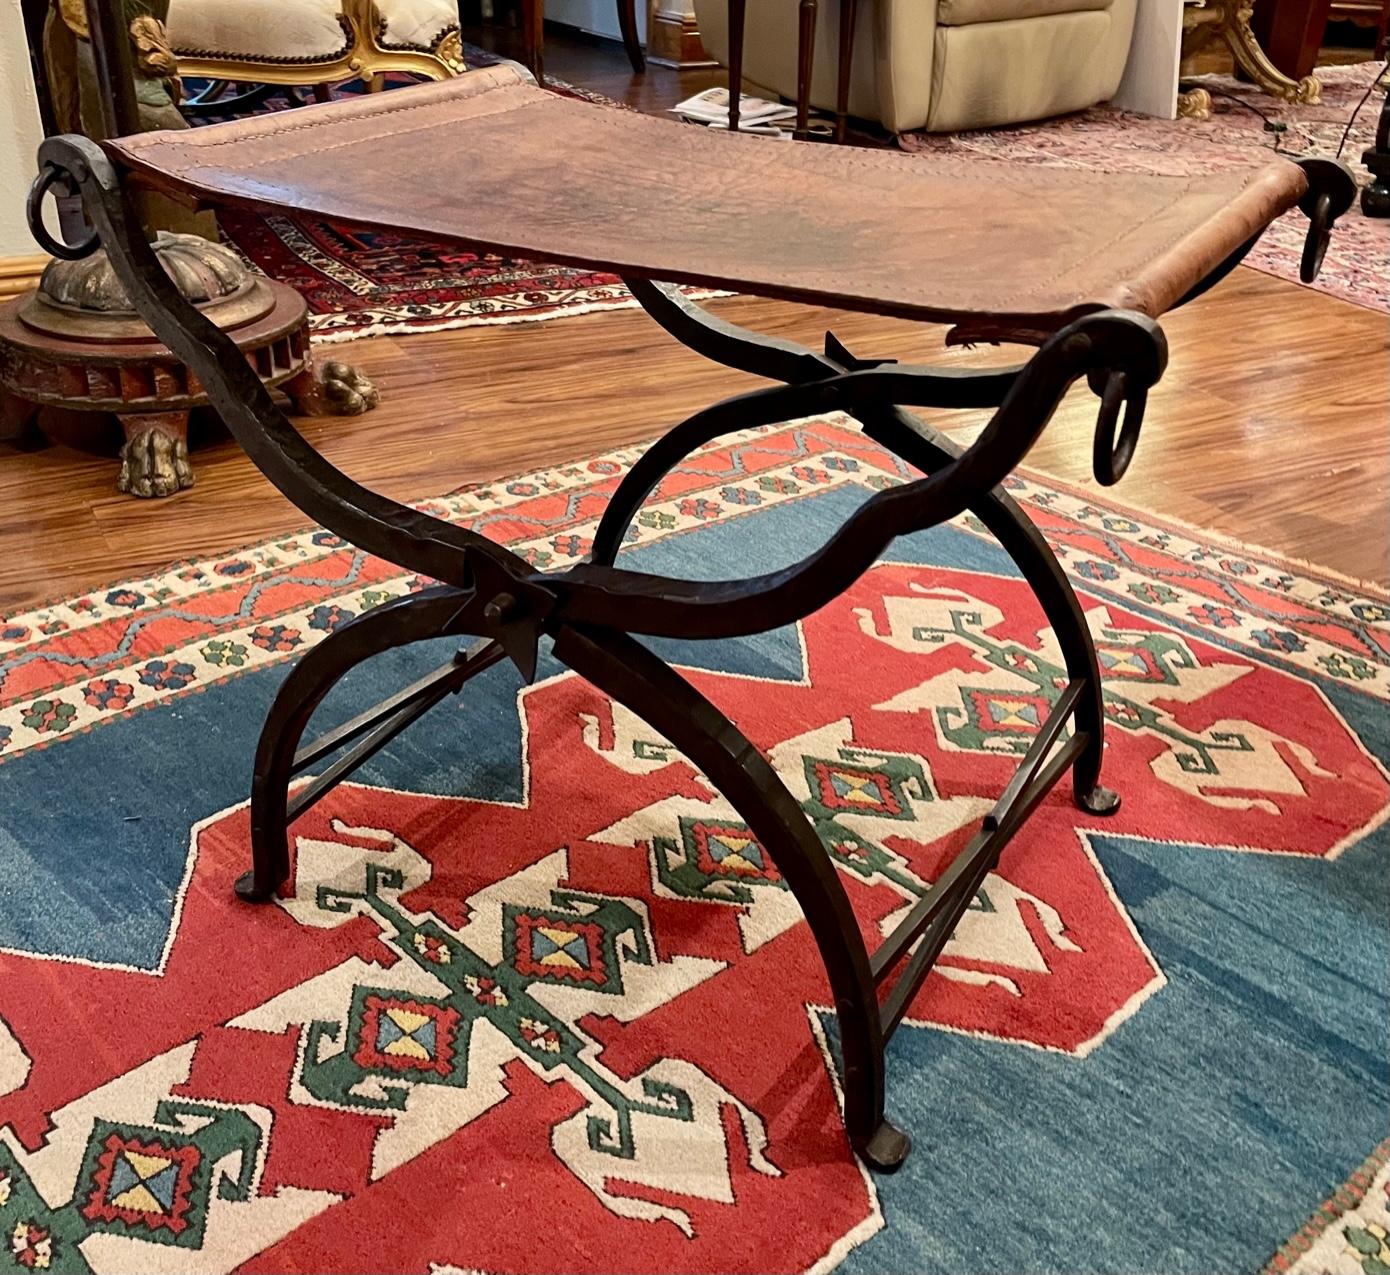 Arts and Crafts style hand hammered wrought iron folding curule seat.

Extraordinarily rare hand wrought iron and stitched leather Curule seat, handcrafted by Morgan Colt and his artistic staff. This seat, built in traditional techniques, is a